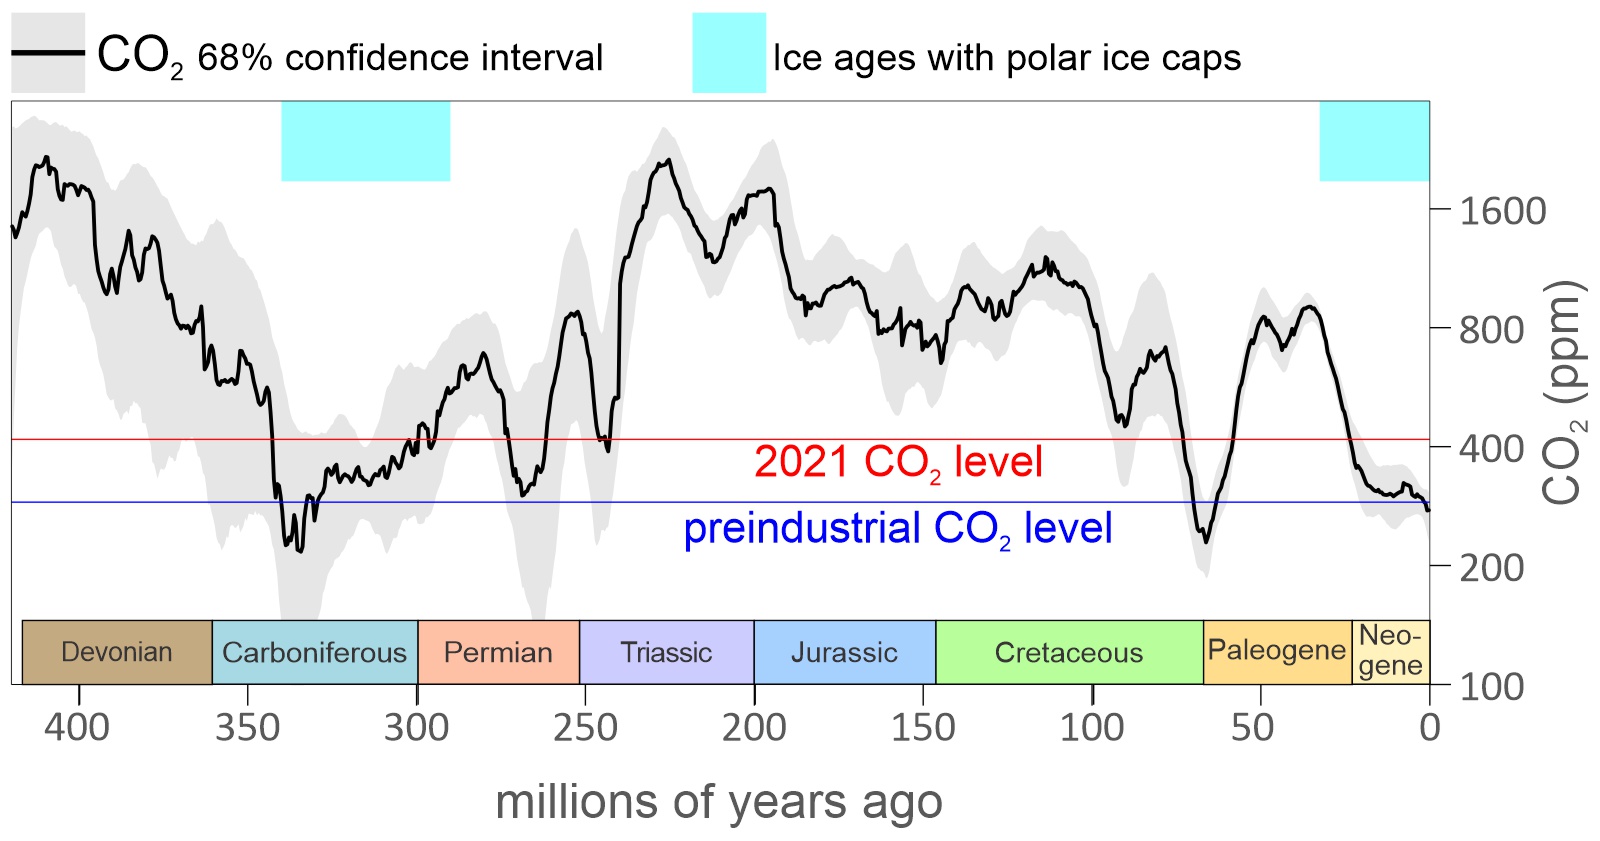 Do high levels of CO2 in the past contradict the warming effect of CO2?